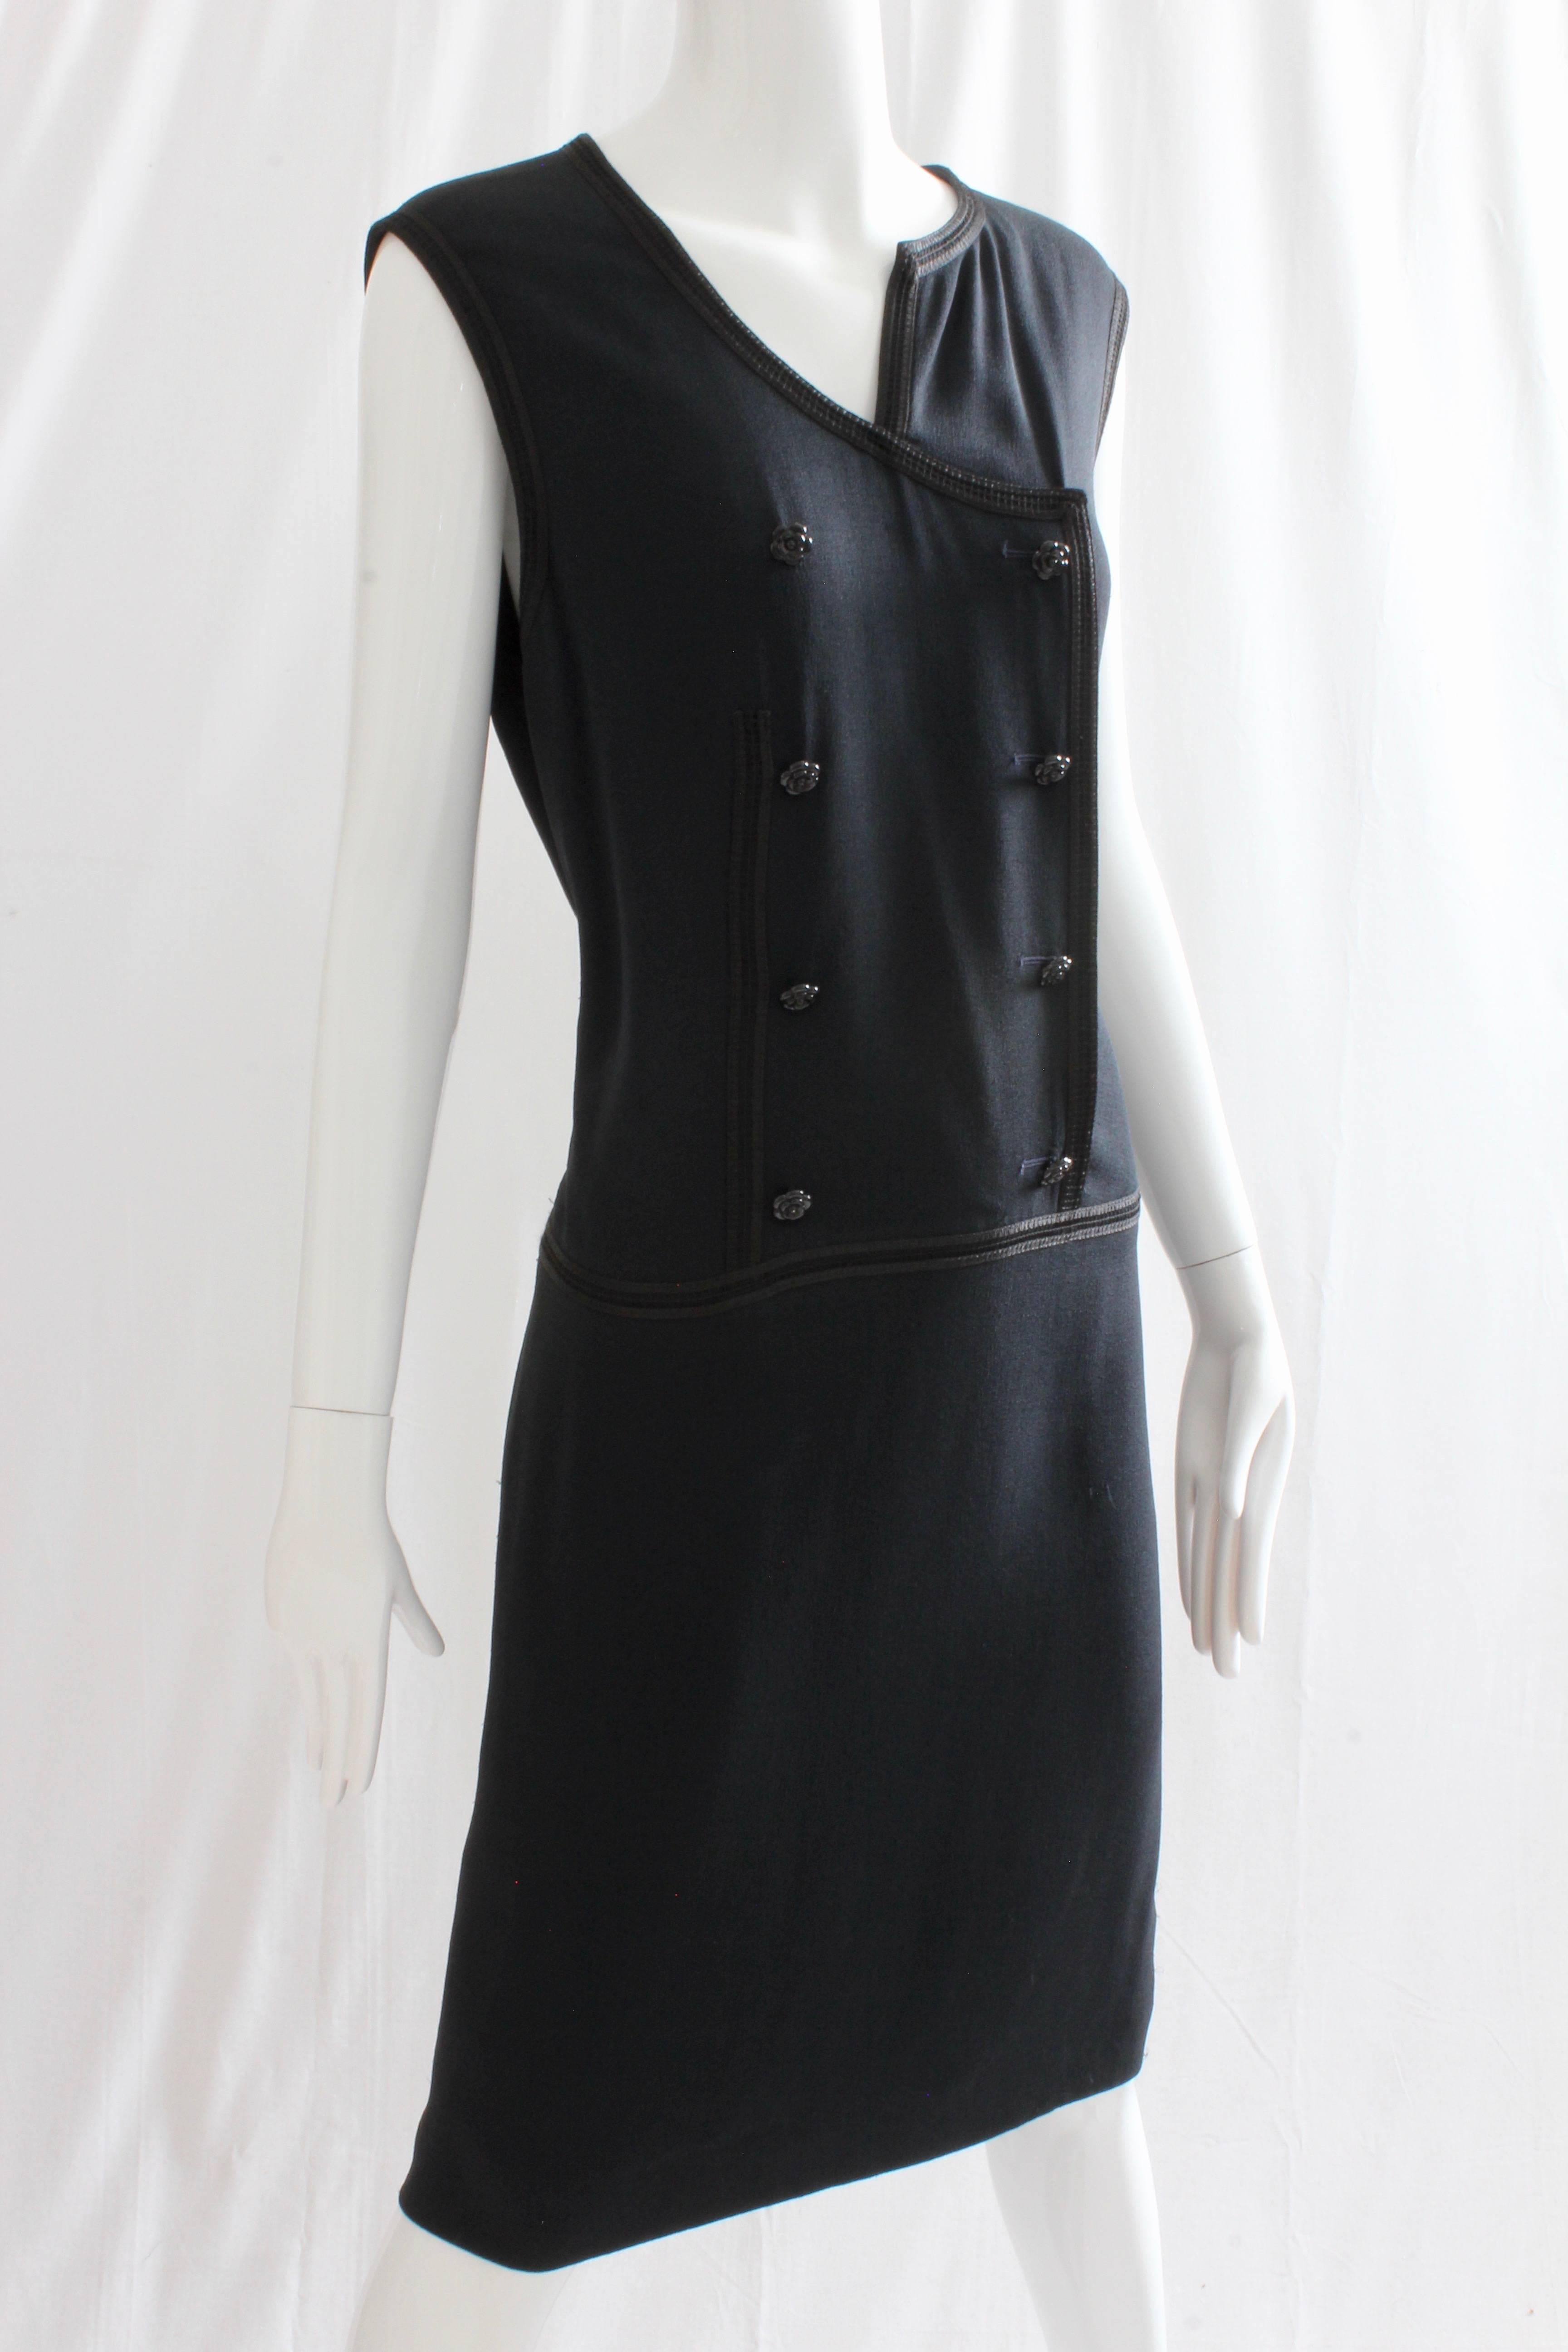 This chic little dress was made by Chanel for their 2002 collection.  Made from a navy crepe, it features an asymmetric collar, black lace trim and fastens with black Camellia buttons.  Fully-lined in navy silk.  In very good condition given its age